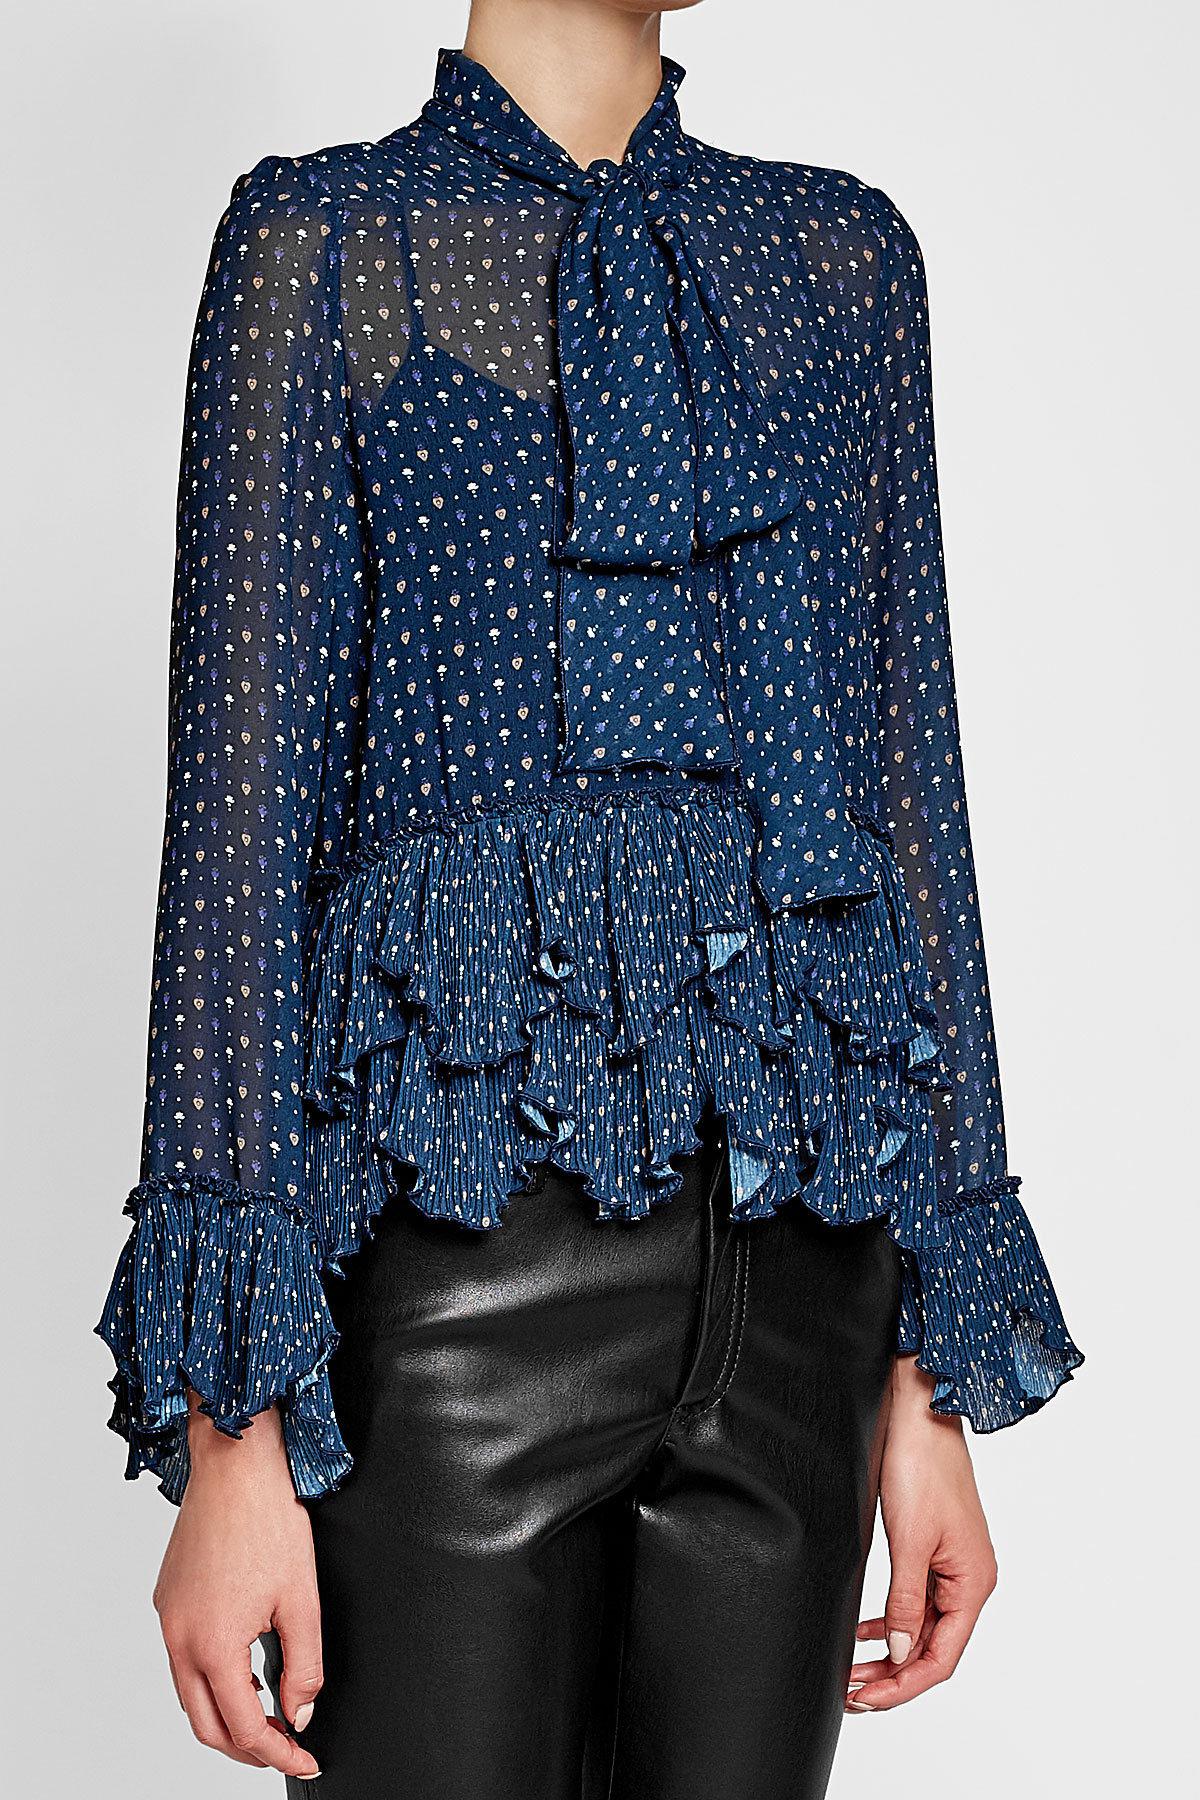 Lyst - See By Chloé Printed Blouse With Ruffles in Blue